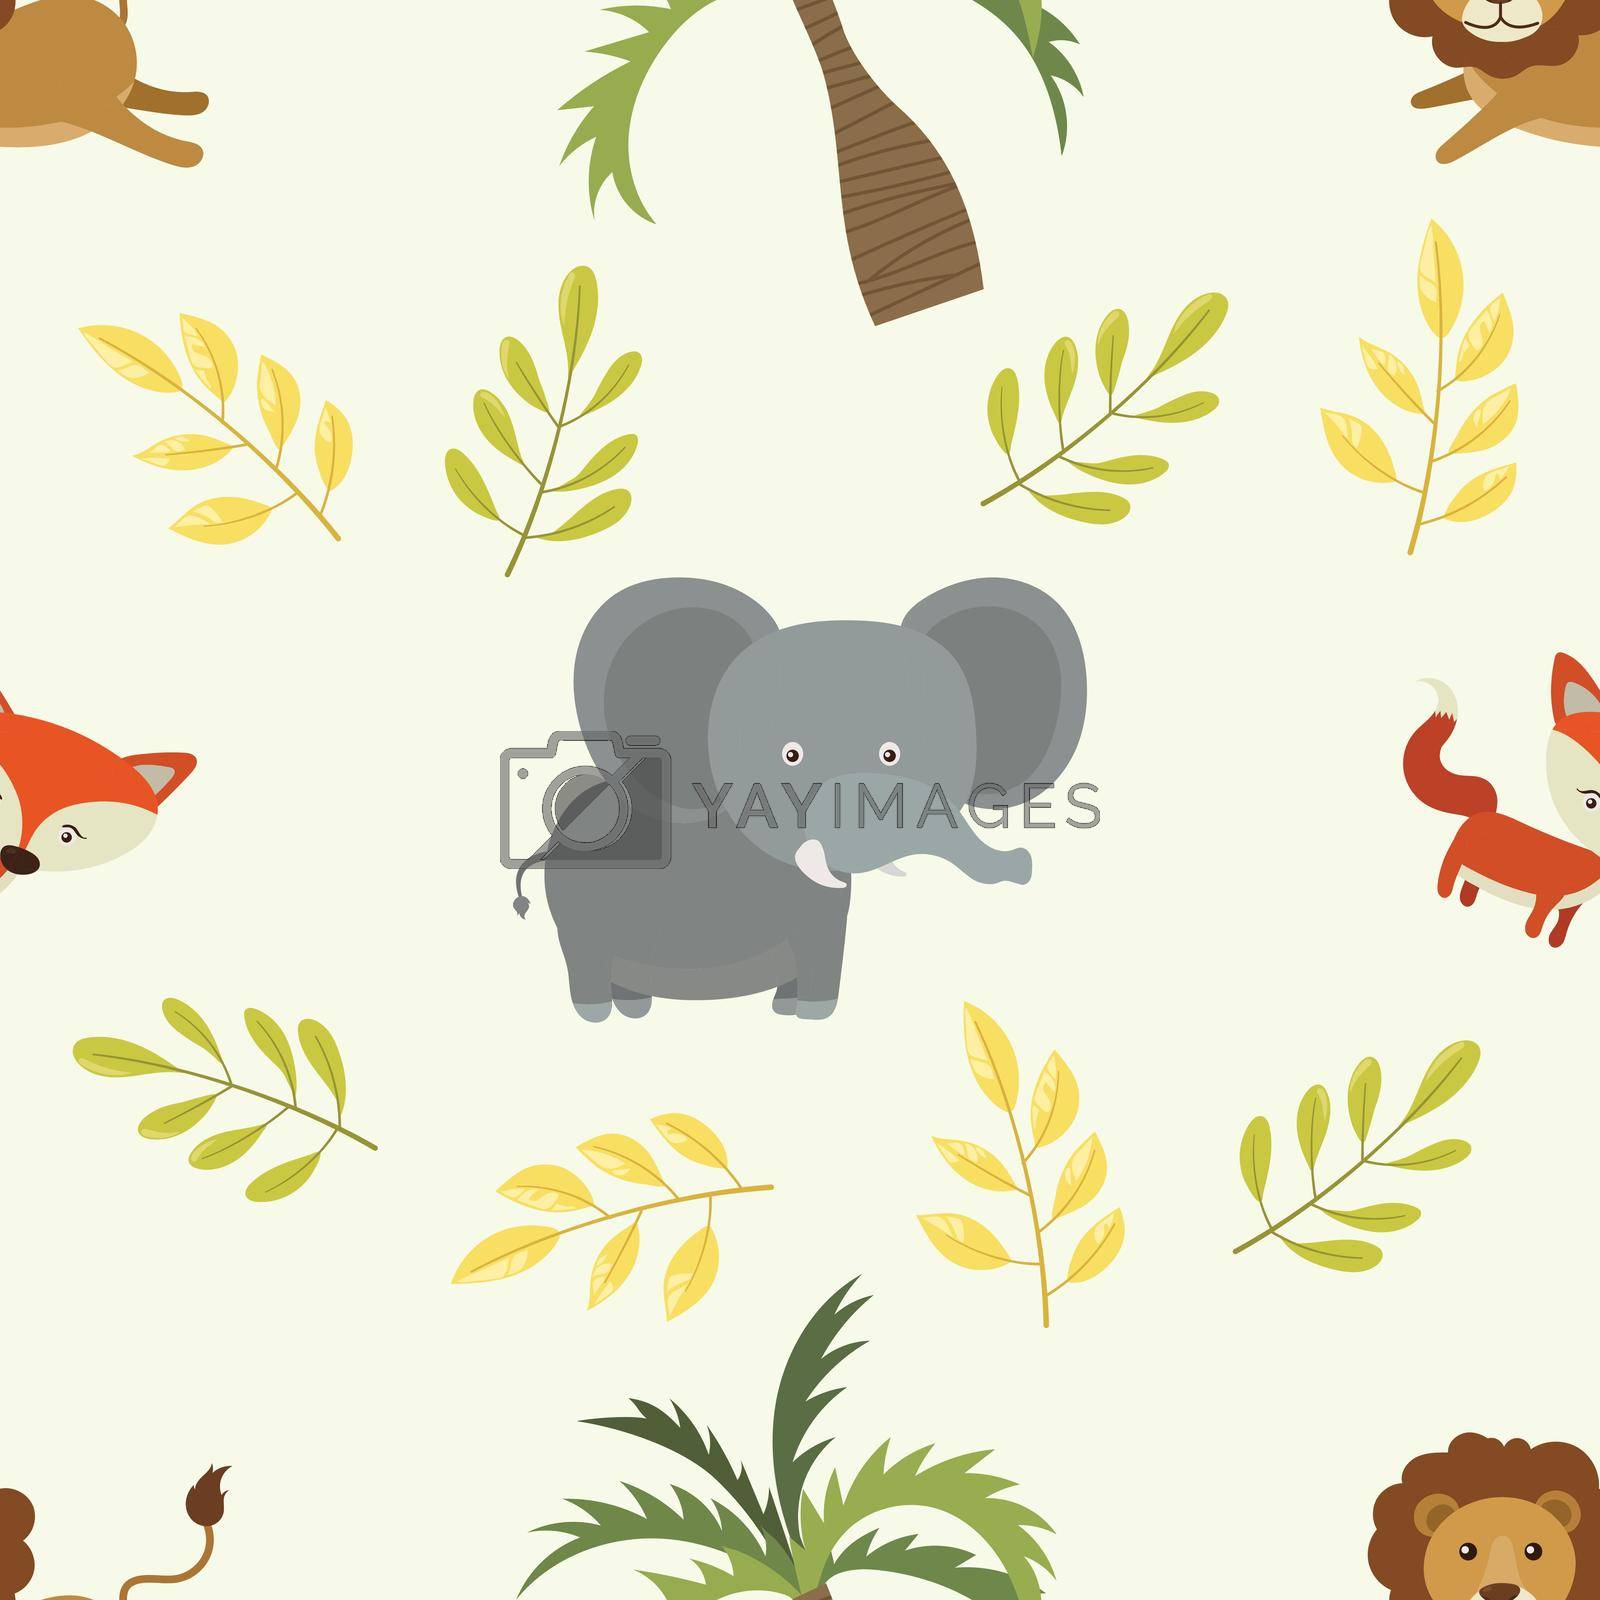 Royalty free image of Seamless doodle jugle animals cartoon pattern by valueinvestor